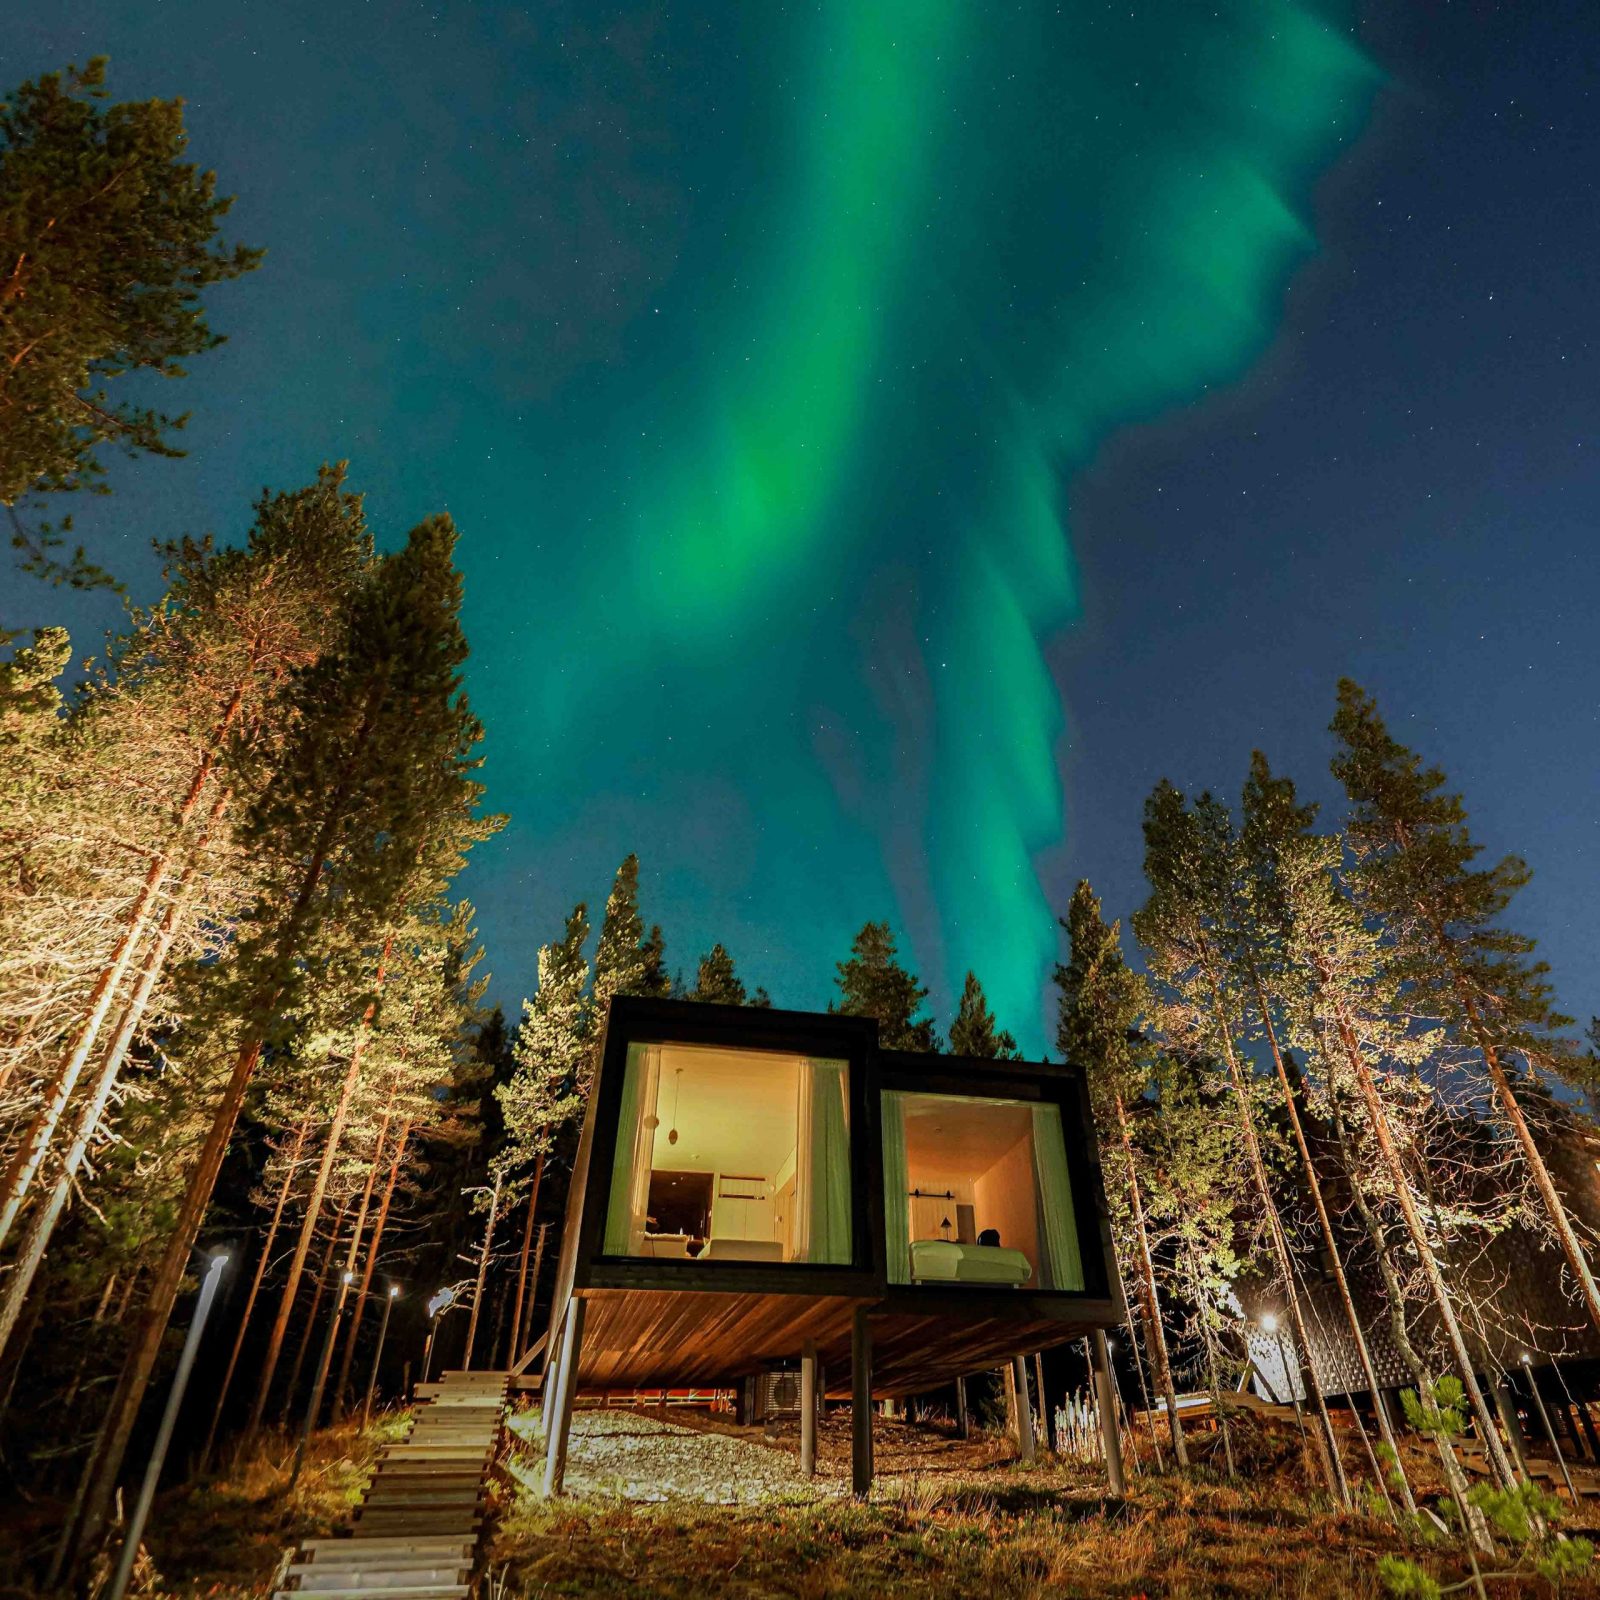 Northern lights dancing above the Arctic Scene Executive Suite in autumn.